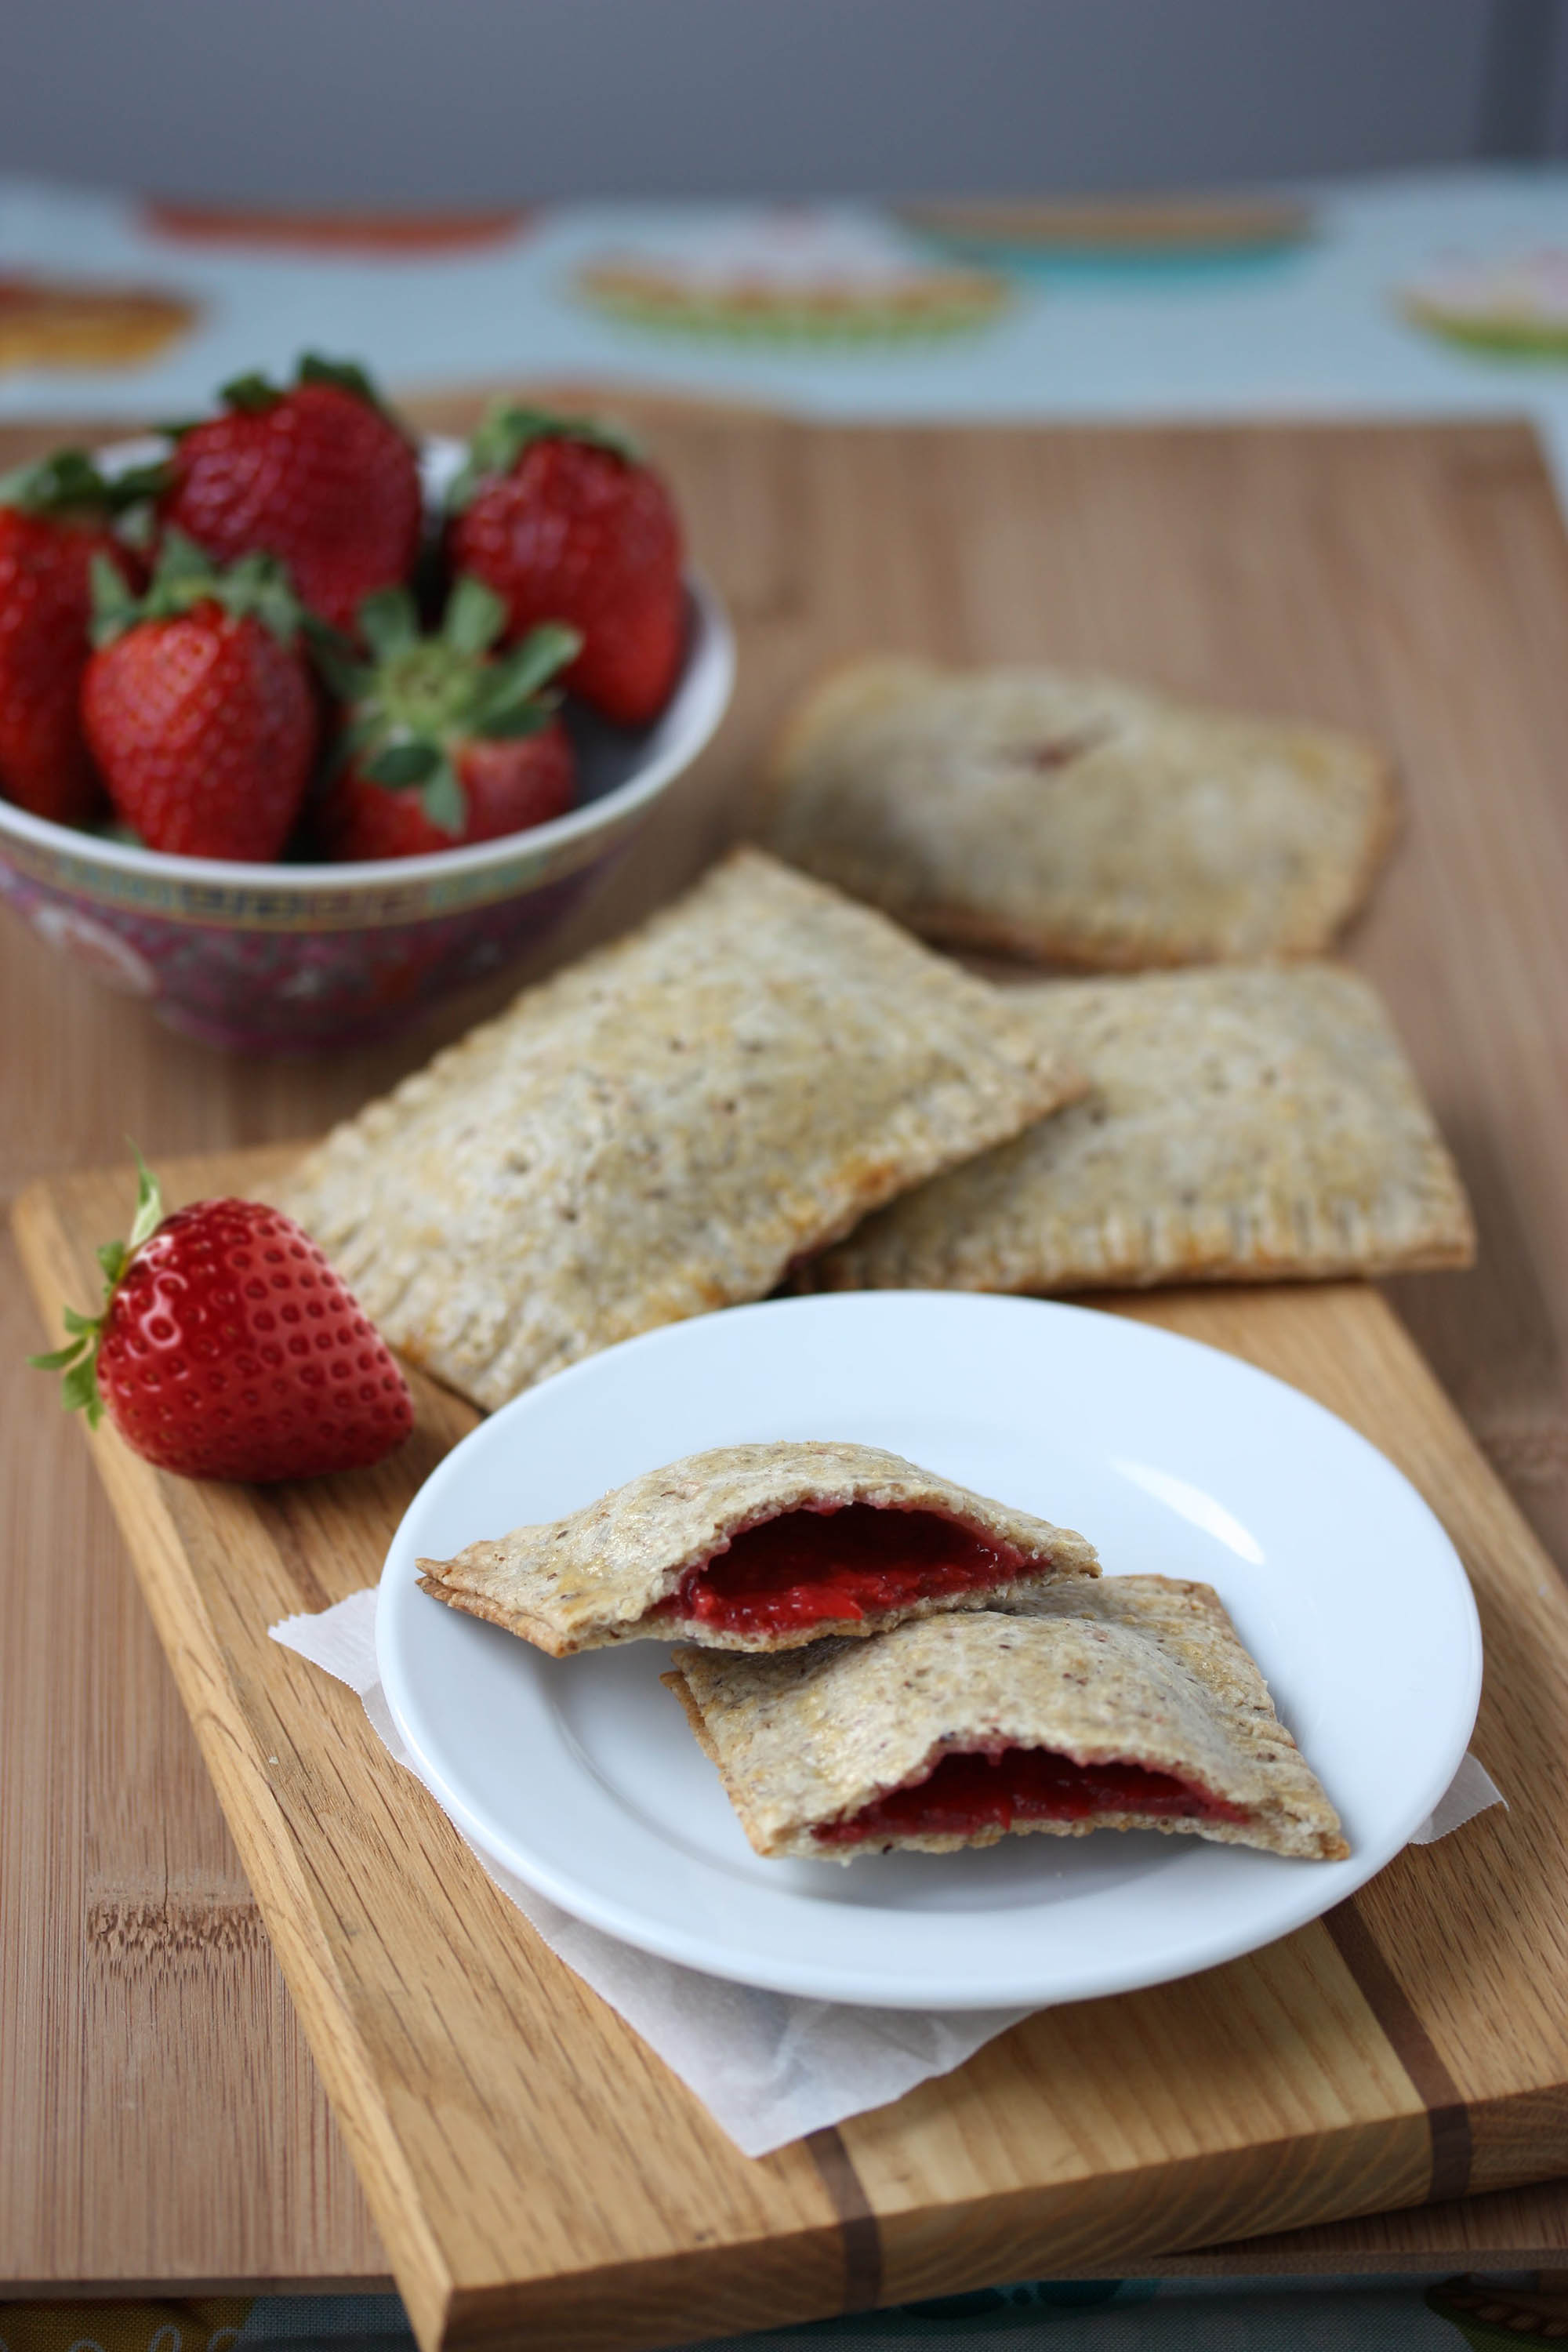 Strawberry-Filled Toaster Pastries